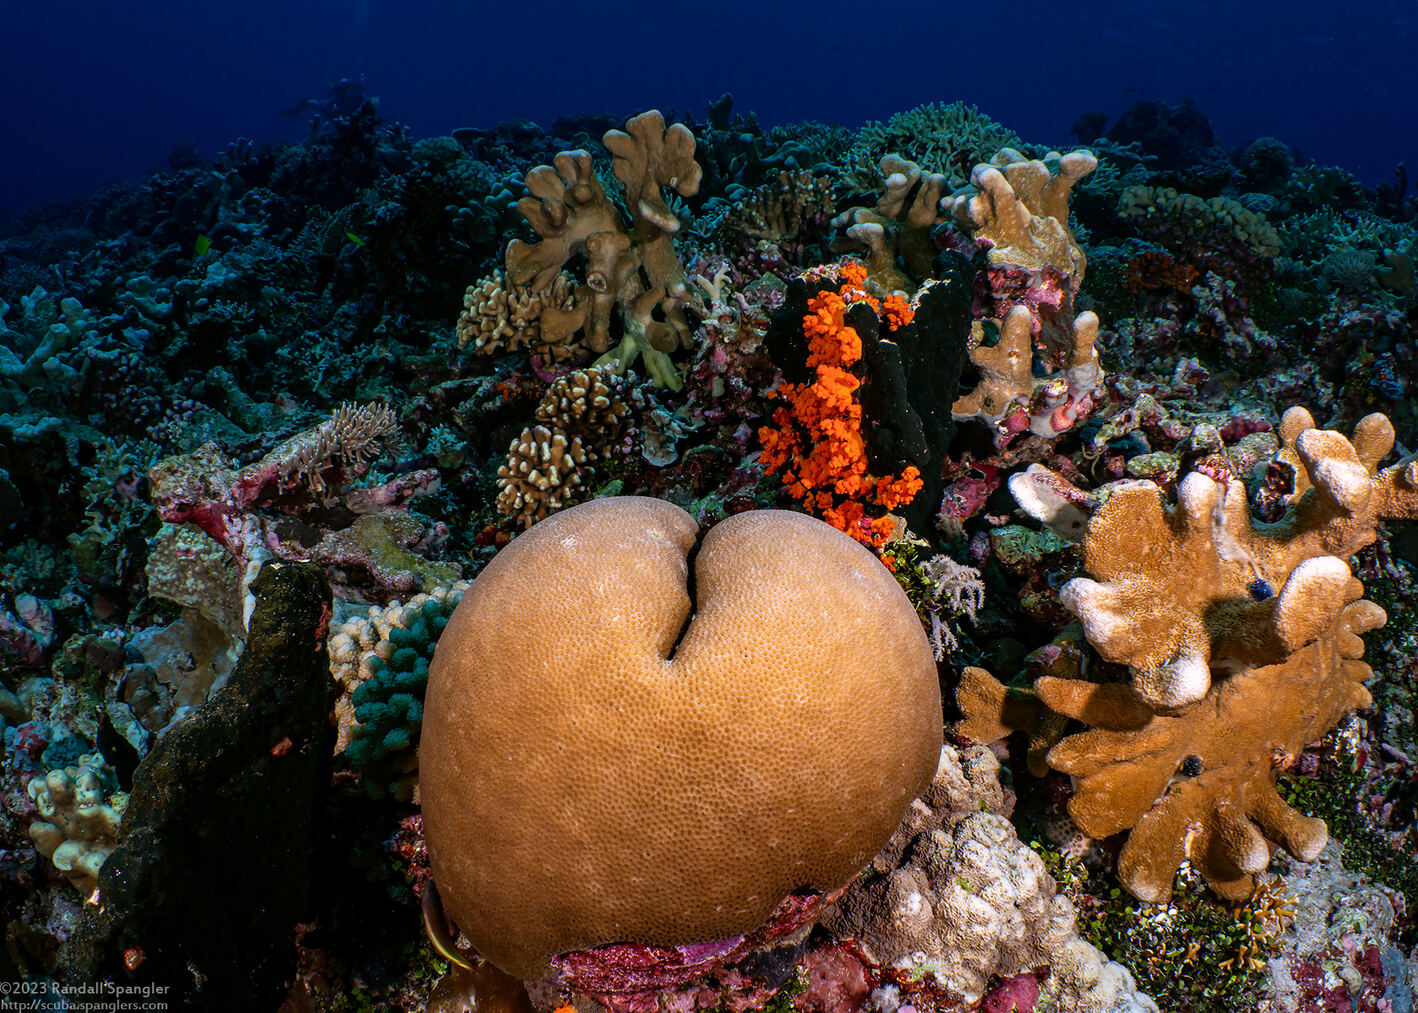 Porites solida (Solid Coral); Dive site with a hard coral bottom